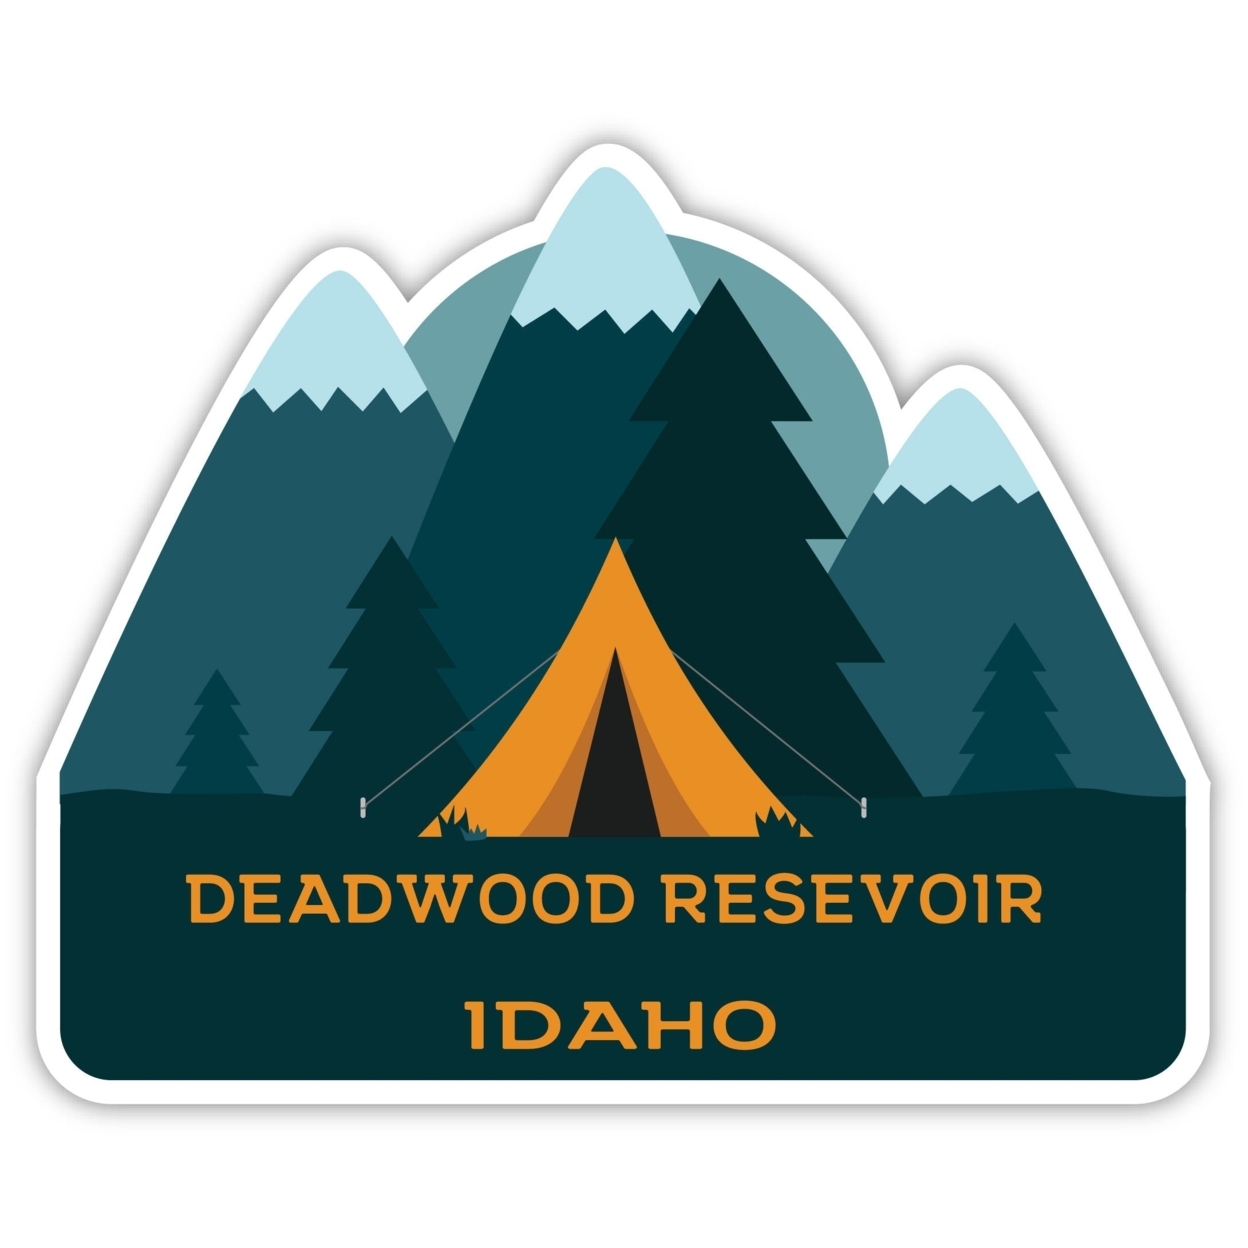 Deadwood Resevoir Idaho Souvenir Decorative Stickers (Choose Theme And Size) - 4-Pack, 2-Inch, Tent